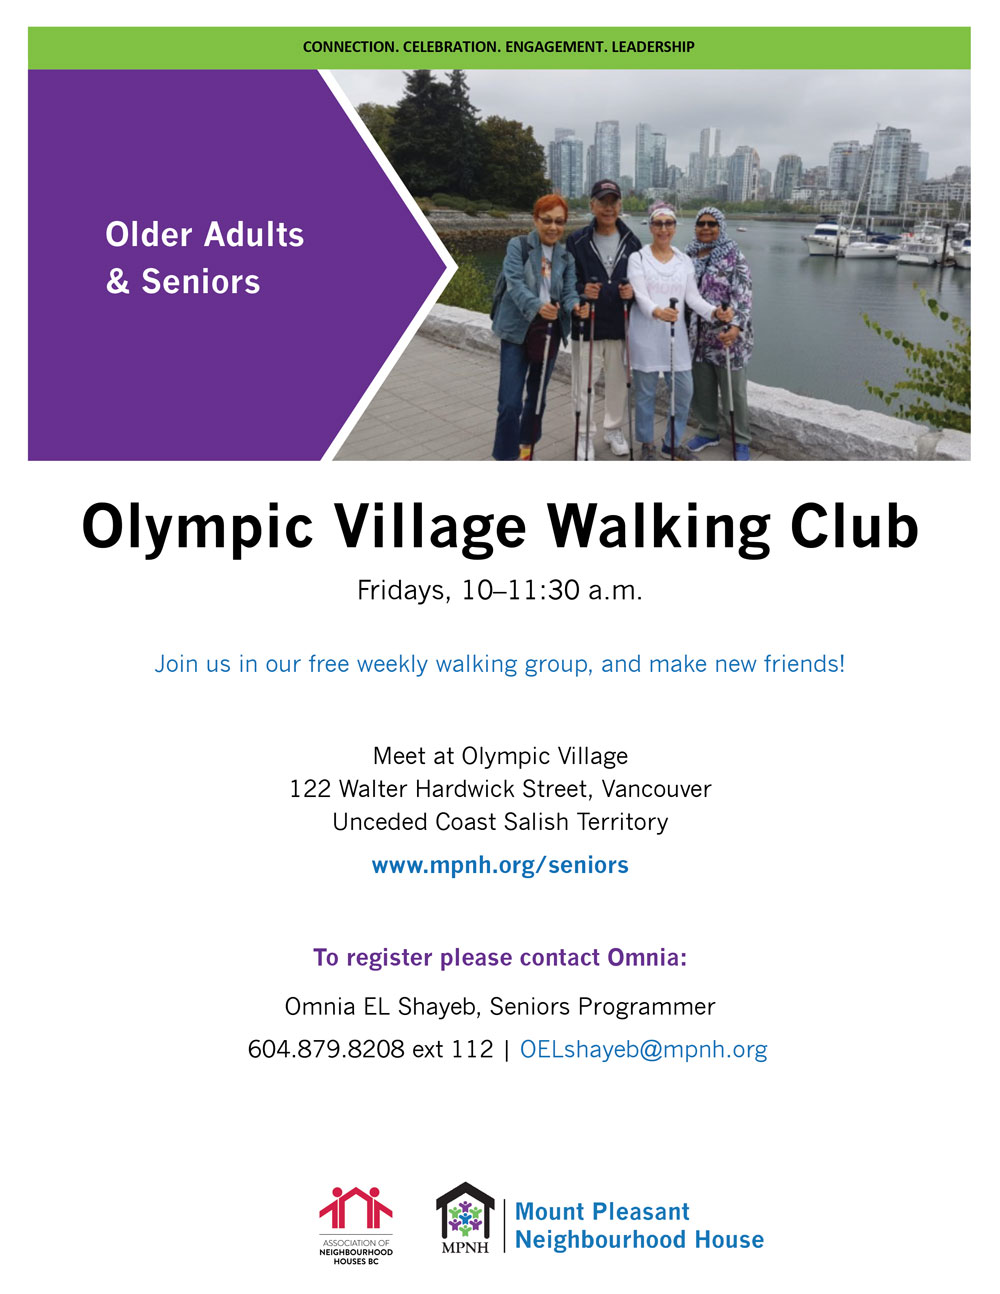 An image of the poster with program details, featuring a photo of four seniors walking together along the False Creek seawall at Olympic Village